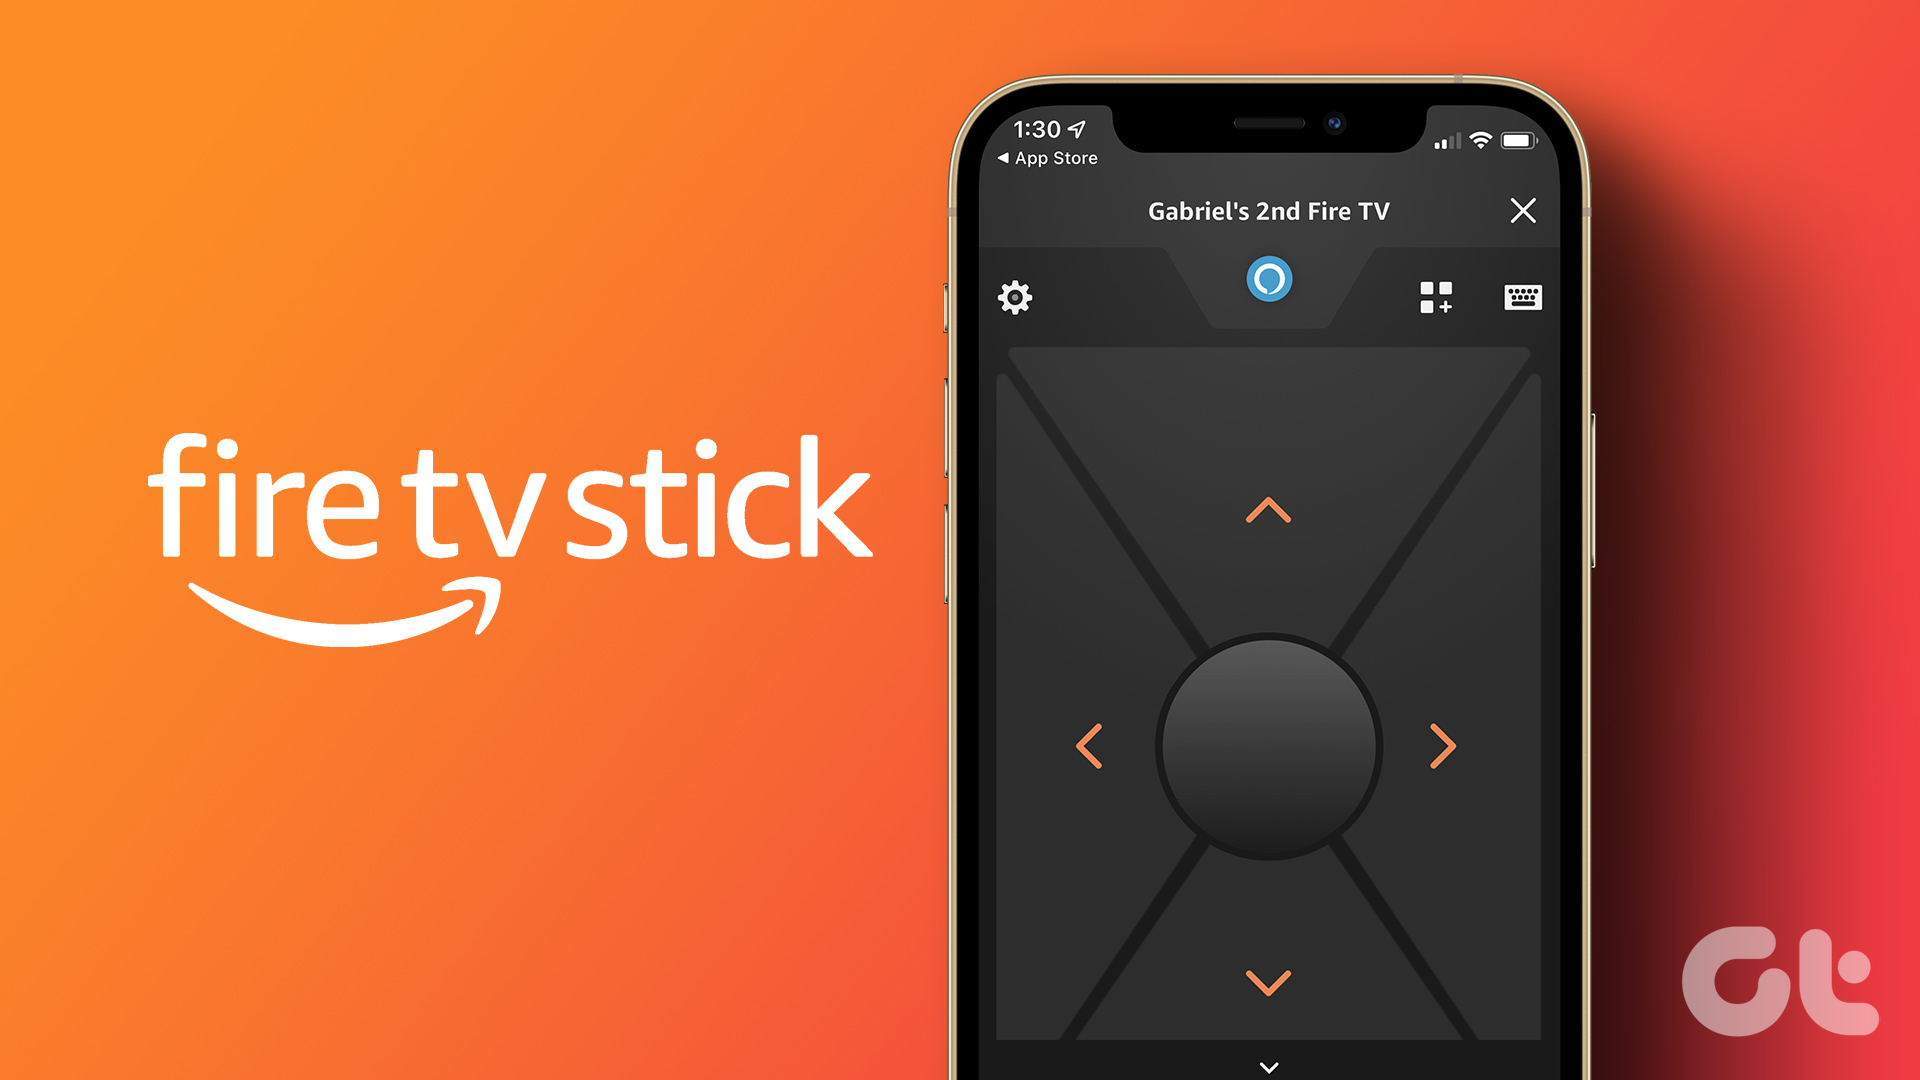 How to Control Fire TV Stick Using Your Phone